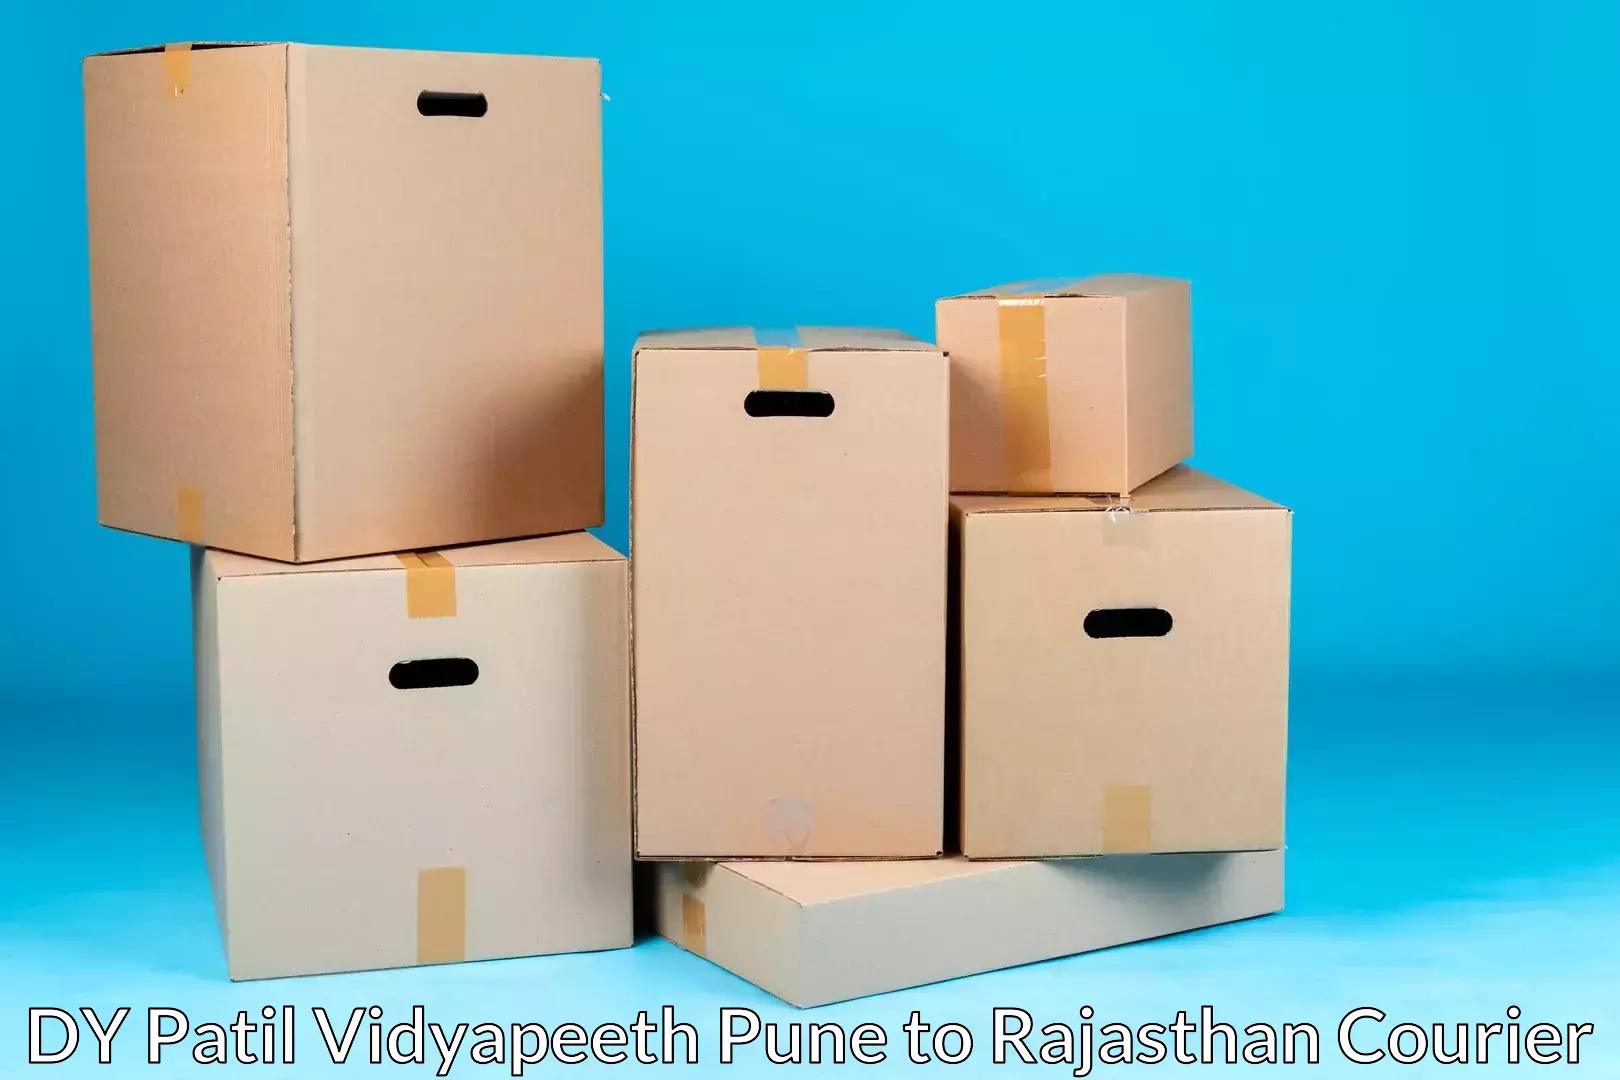 Home relocation experts DY Patil Vidyapeeth Pune to Kishangarh